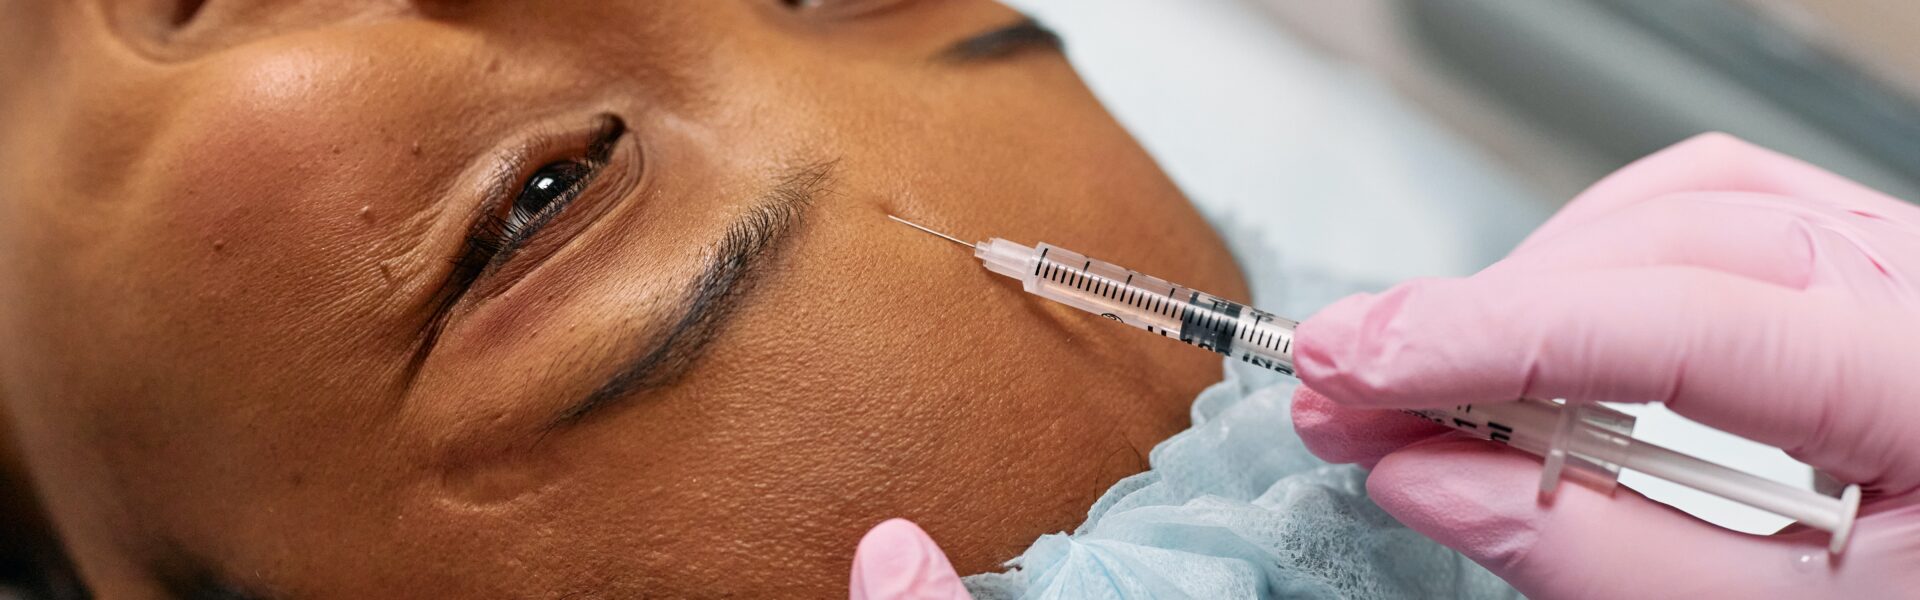 Non-Surgical Facial Rejuvenation: Exploring Options for a Youthful Appearance banner